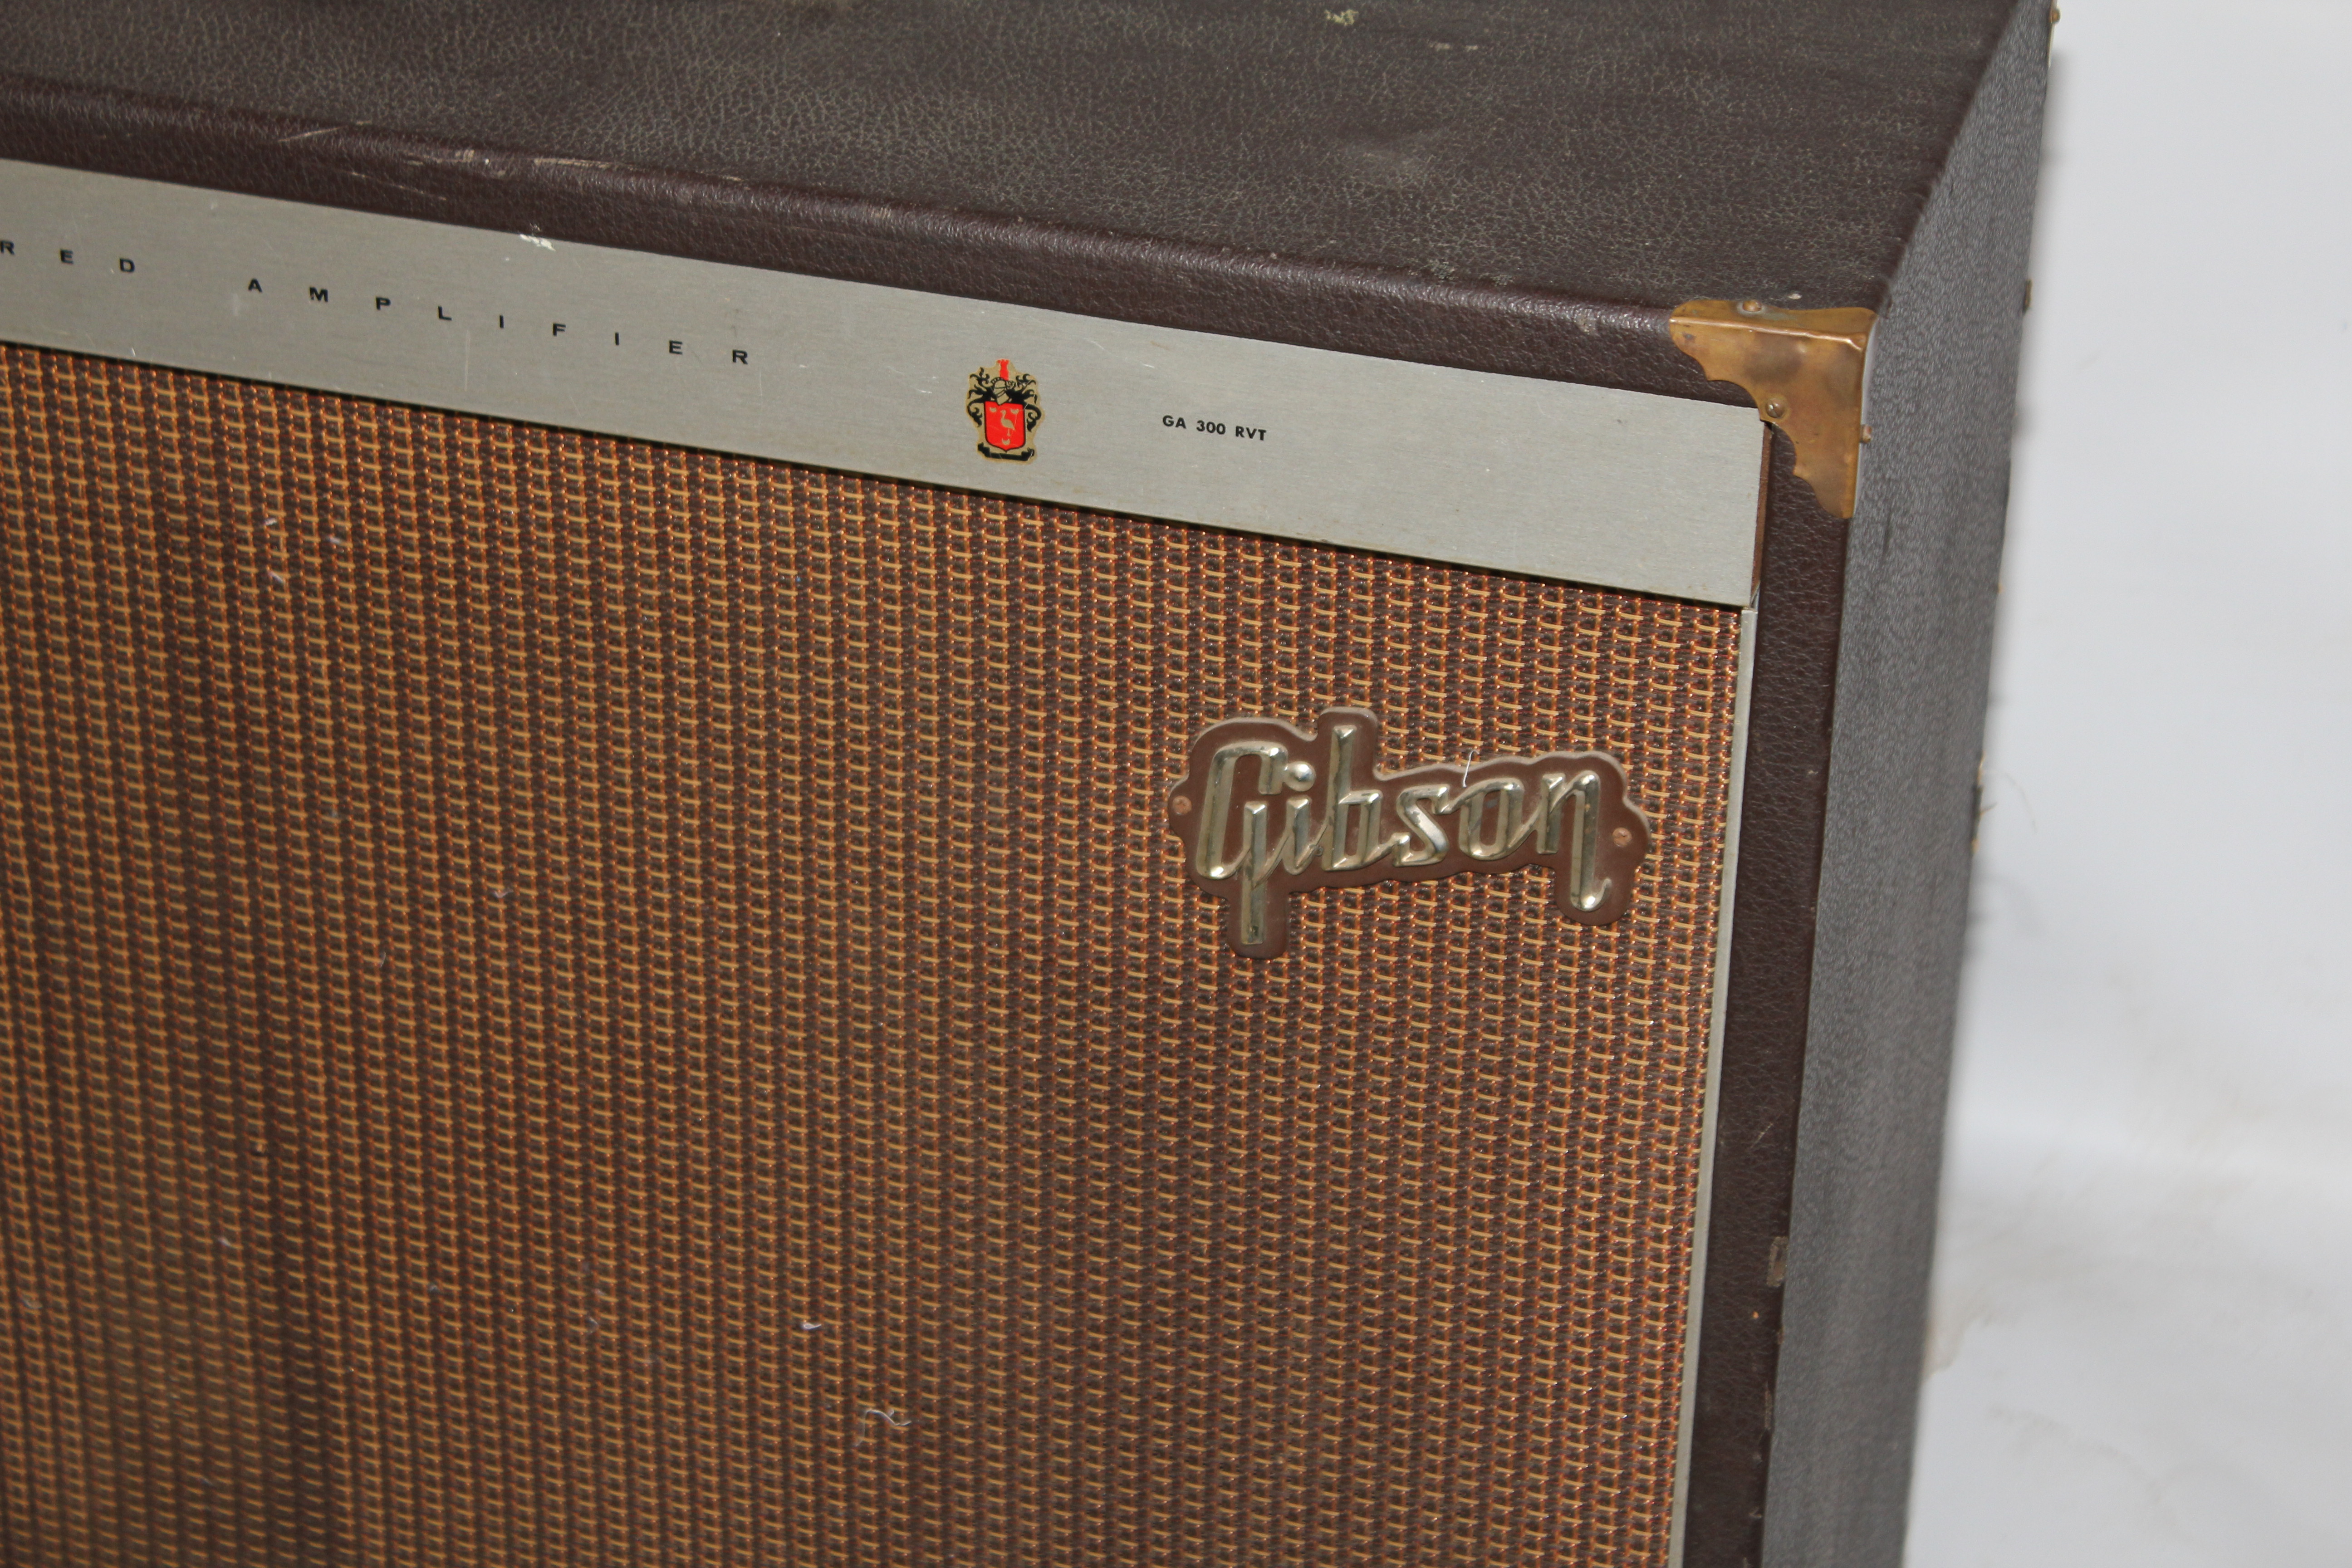 A GIBSON GA 300 RVT CREDTLINE TUCKAWAY AMP Made only 1962/1963. - Image 2 of 3